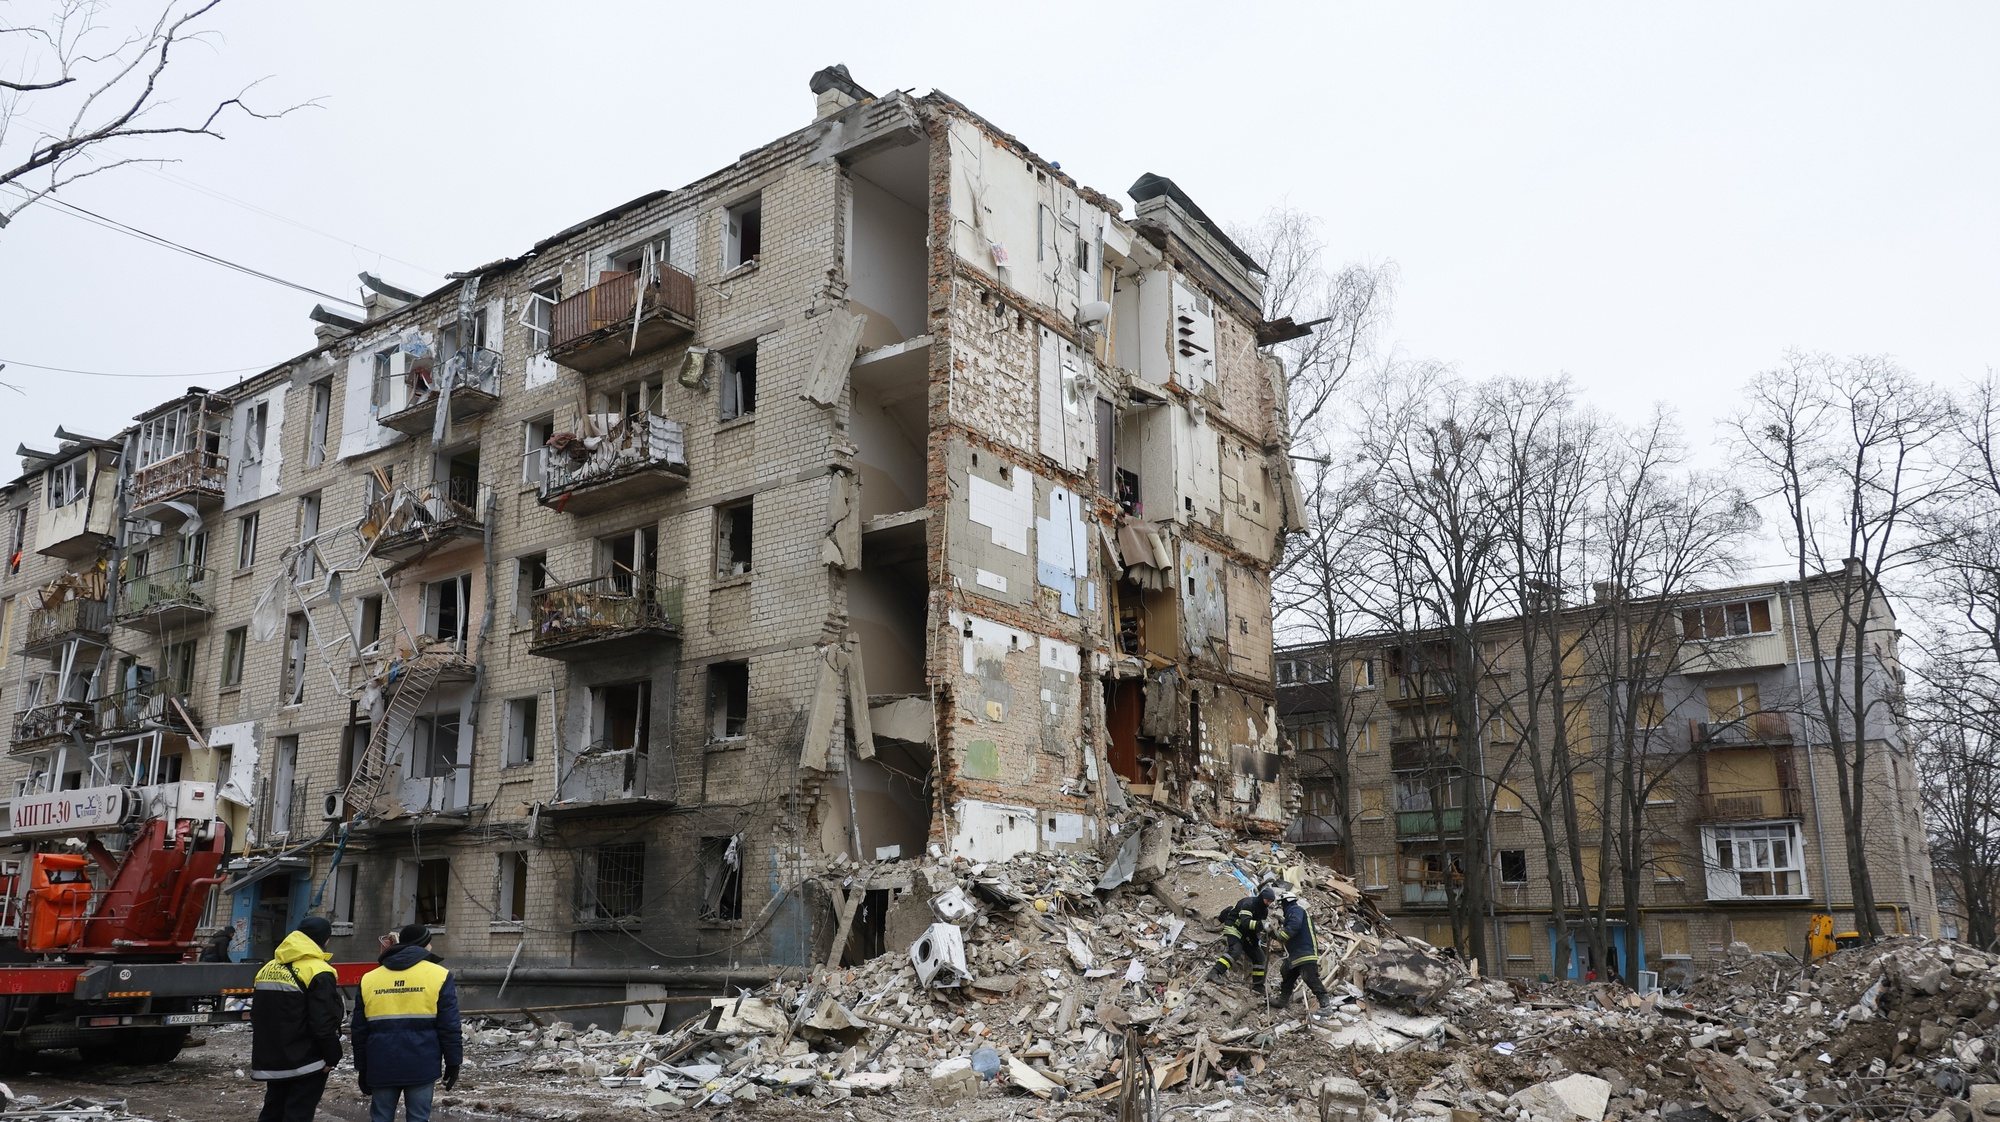 epa11101441 Ukrainian workers clean debris of damaged buildings on the site of a missile attack in Kharkiv, northeastern Ukraine, 24 January 2024, amid the Russian invasion. At least ten persons were killed and more than 60 were injured in Russian missile strikes in Kharkiv on 23 January, according to the State Emergency Service of Ukraine. Russian forces launched air strikes targeting Kyiv and Kharkiv on 23 January, Ukrainian authorities said.  EPA/SERGEY KOZLOV